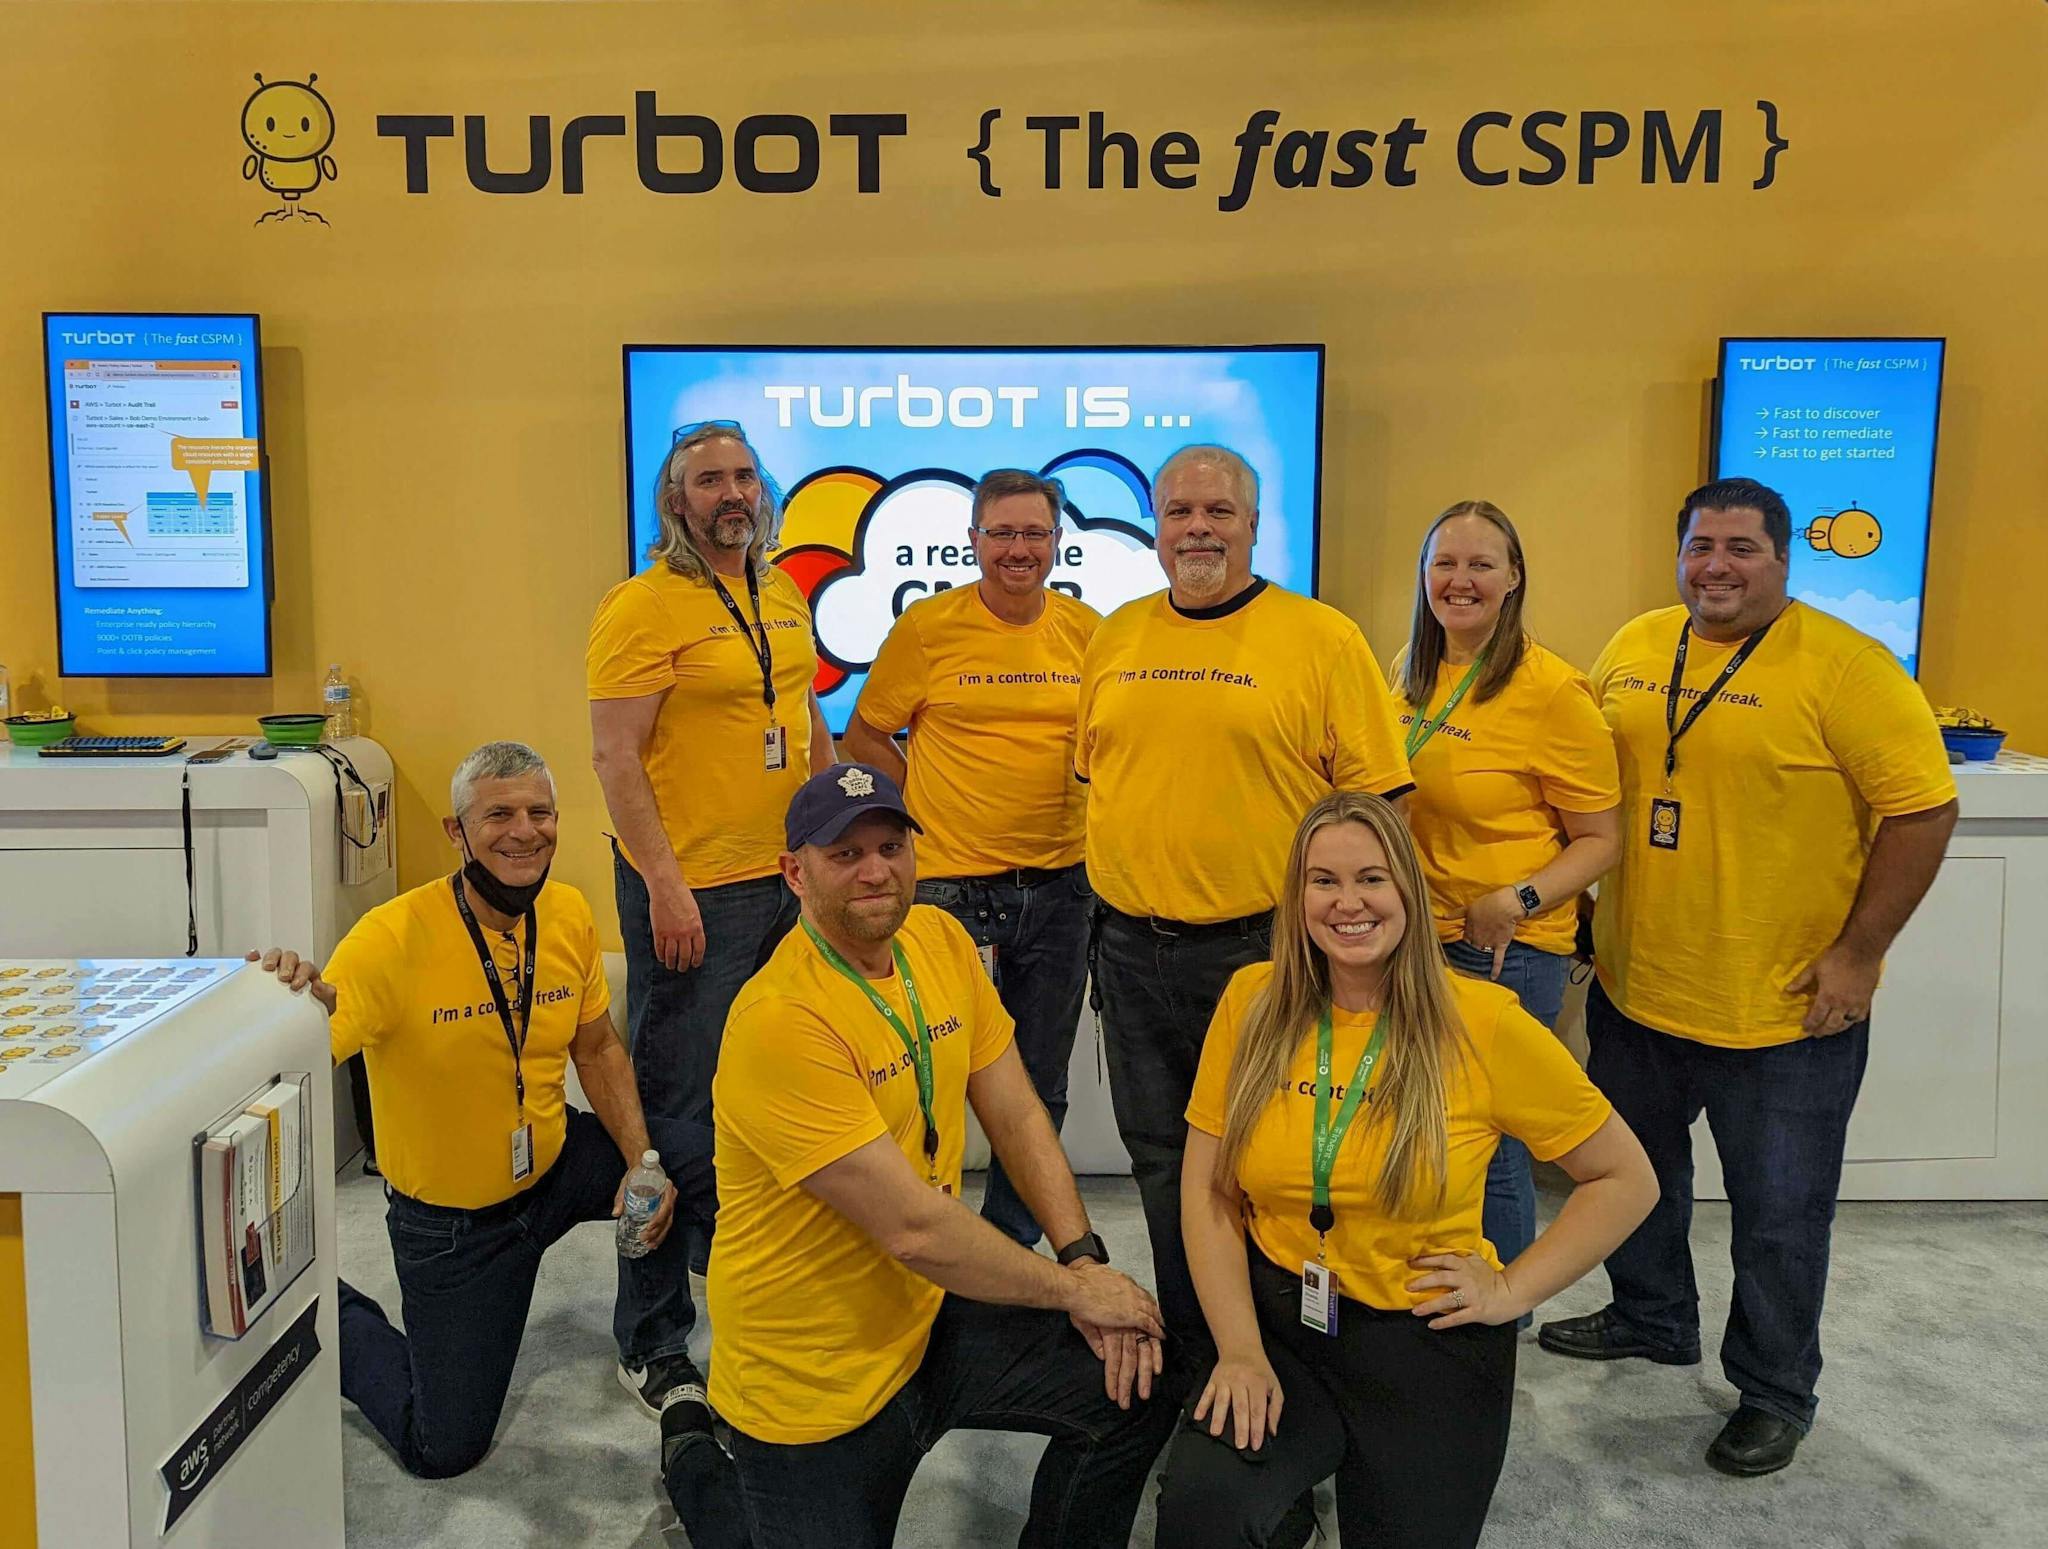 AWS re:Invent was back in person for the first time since 2019! The event was high energy and the attendees made it nspiring, educational and fun to be back. Turbot was very proud to return as a sponsor this year.